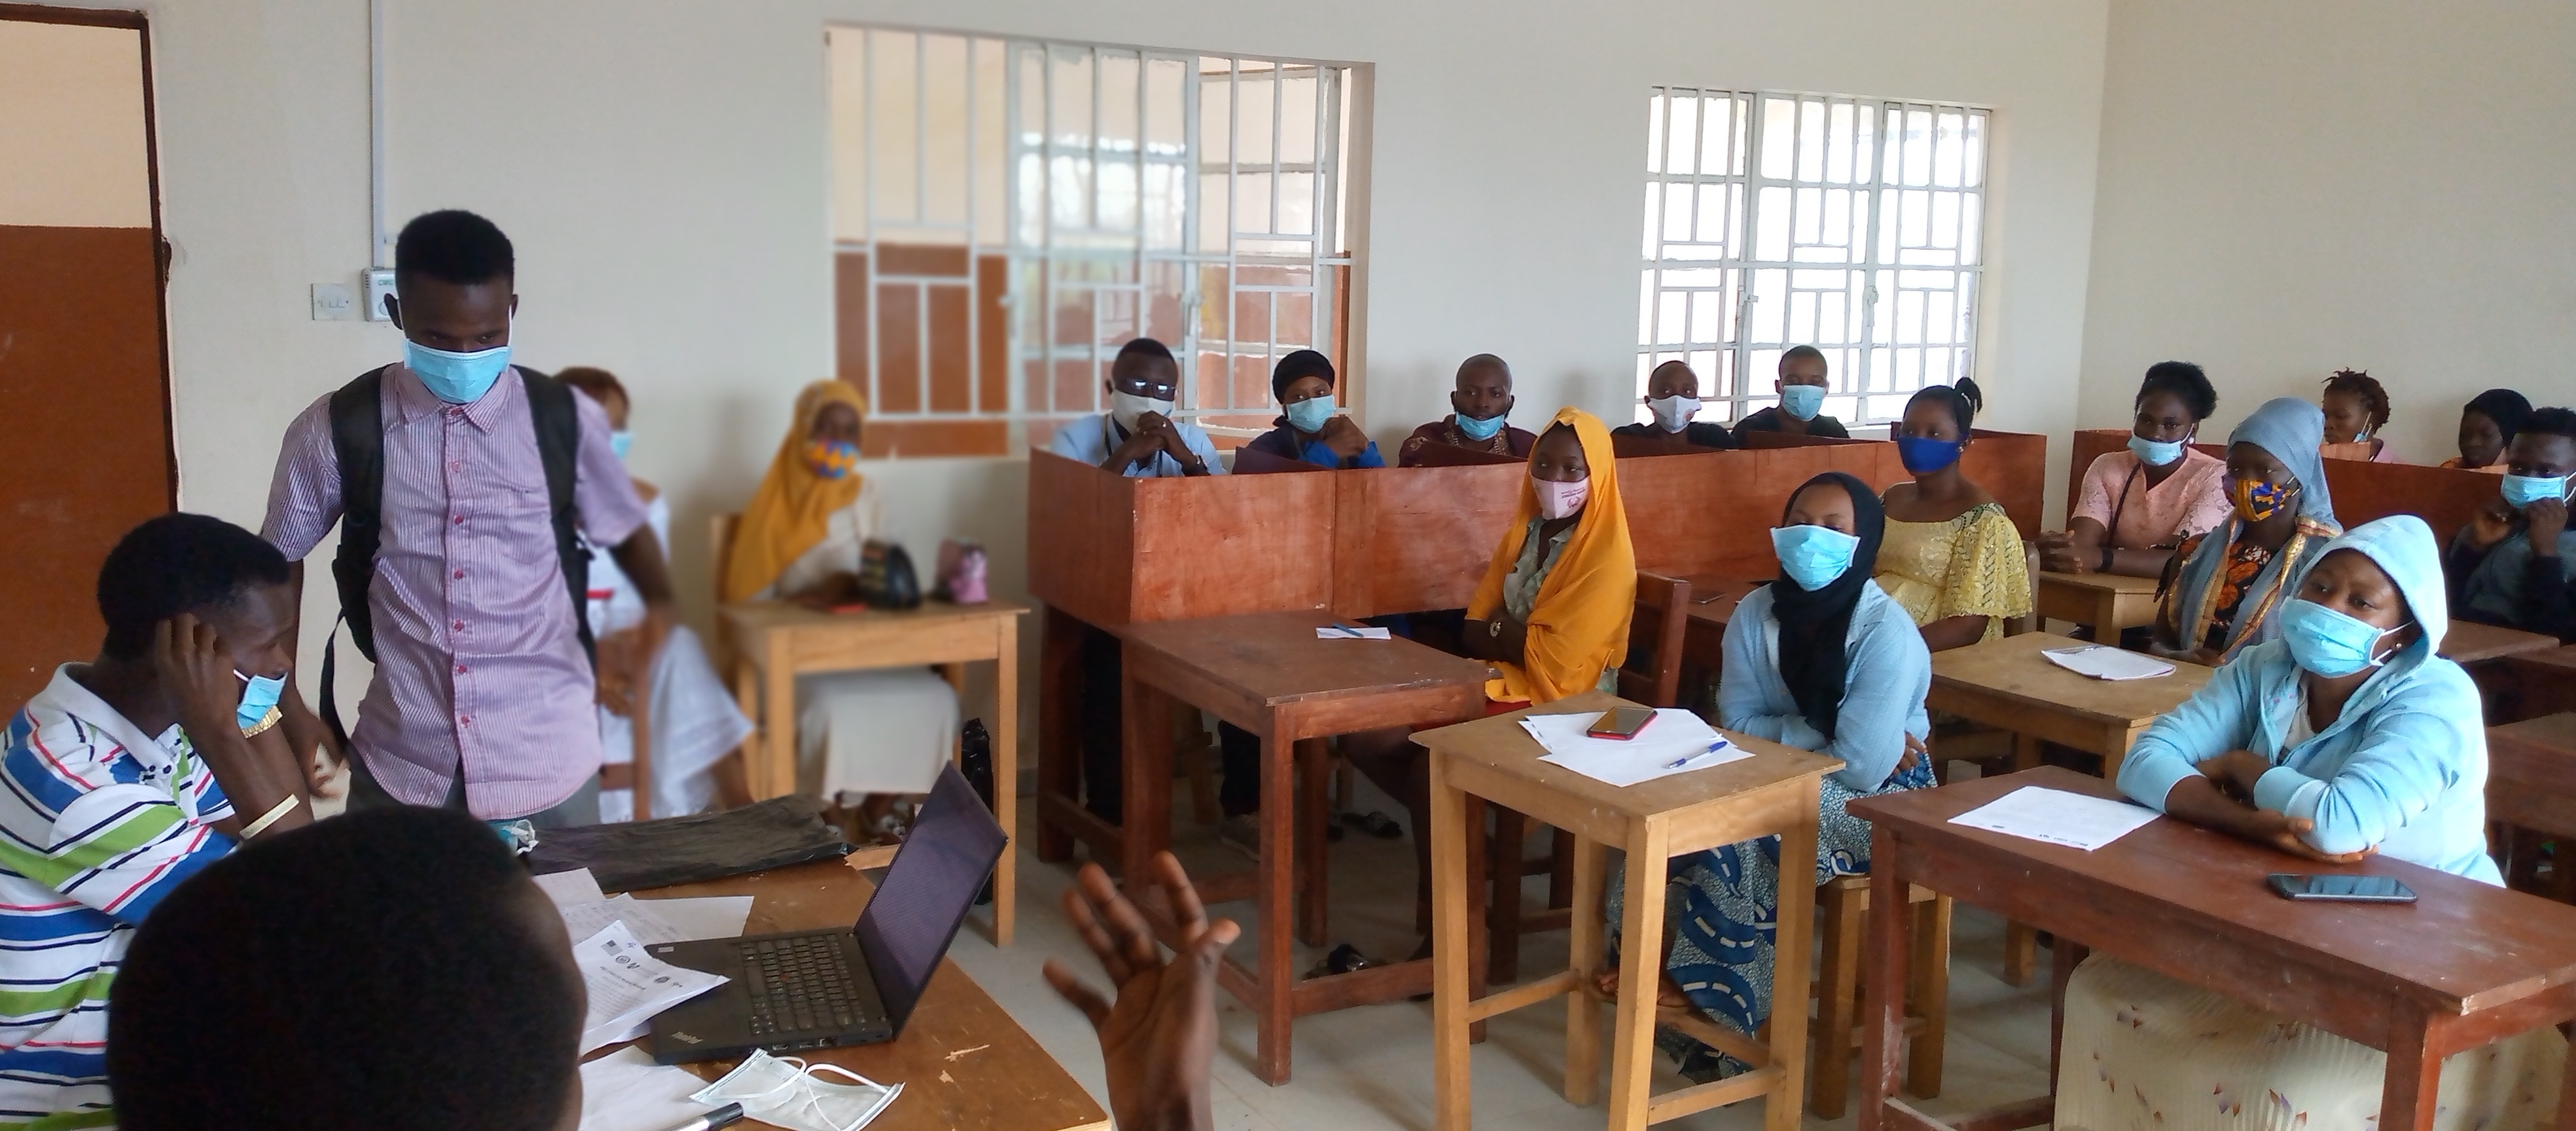 a large group of students wearing masks sit in a classroom behind desks